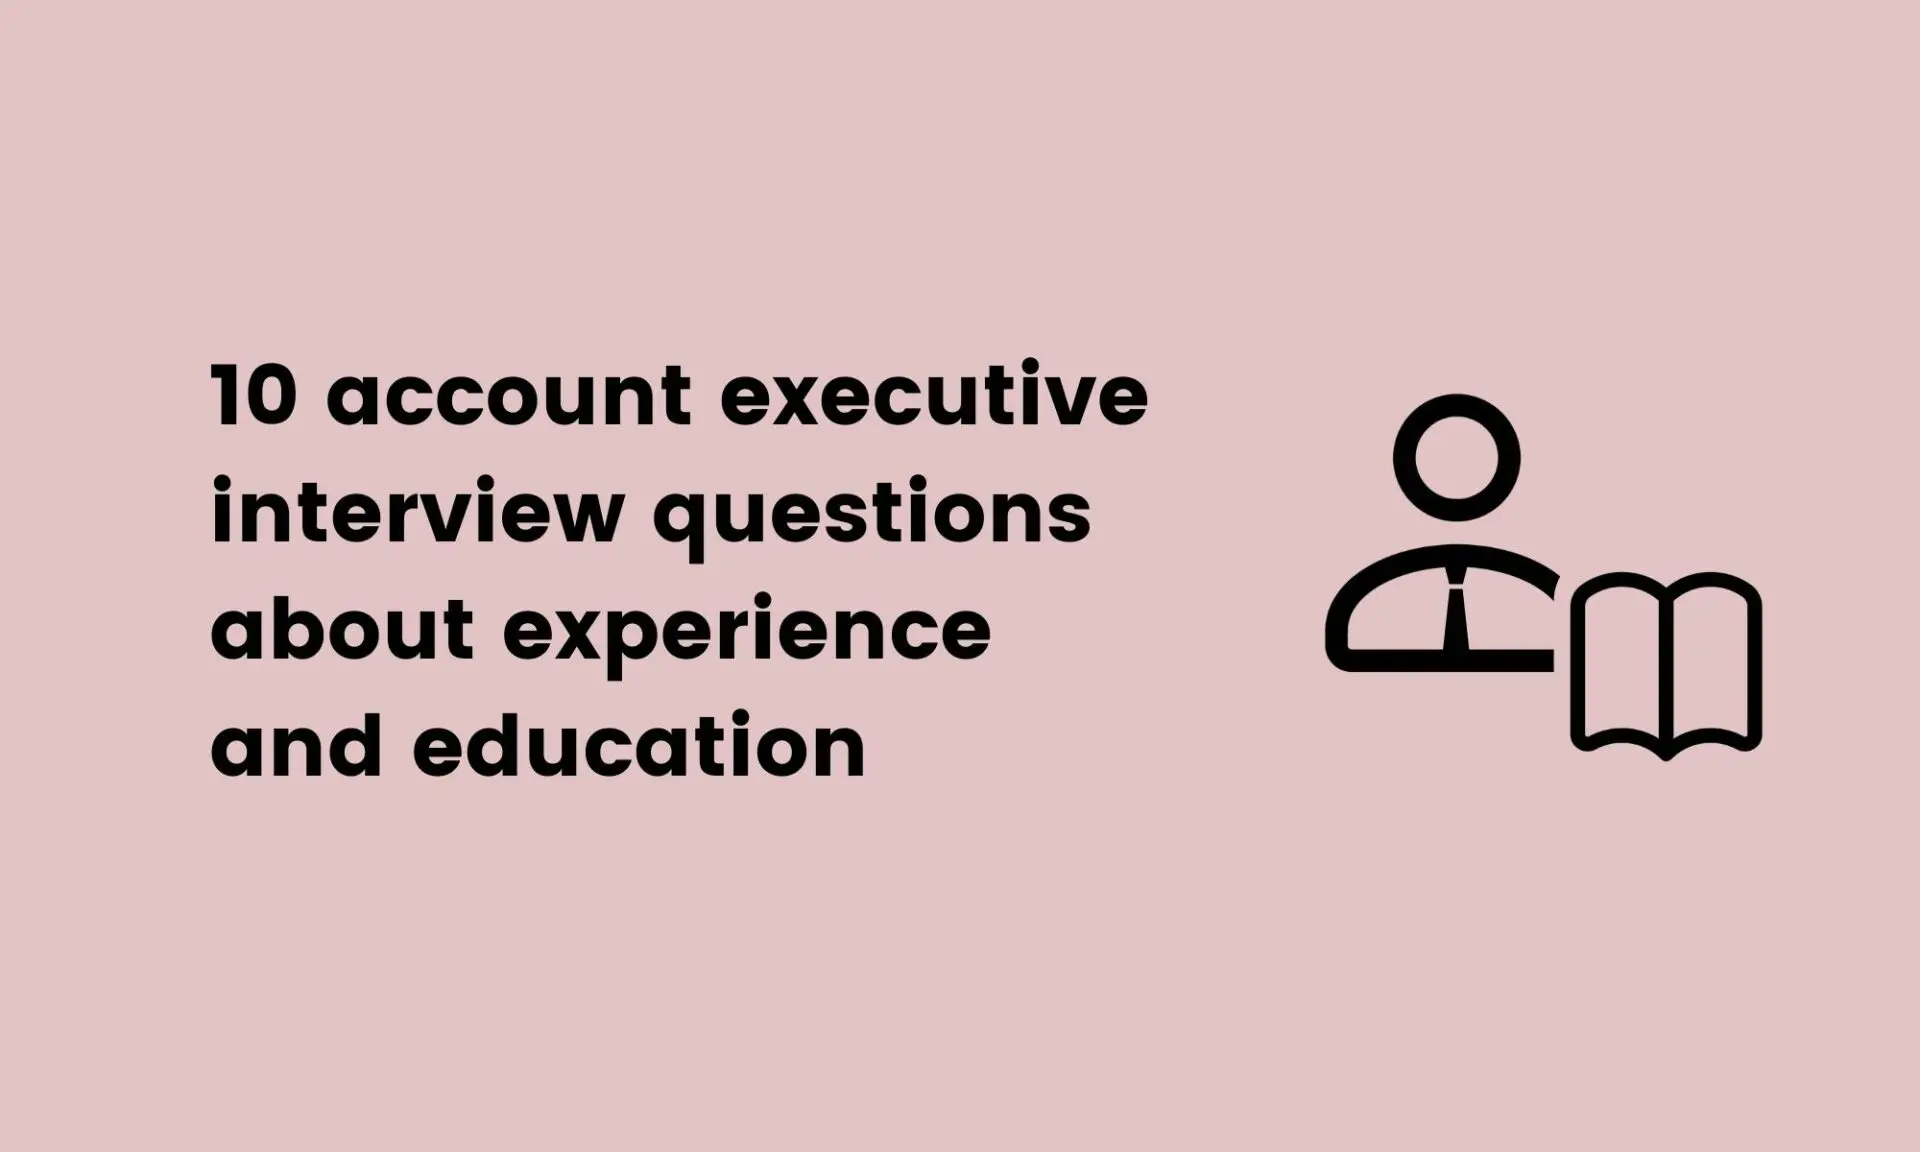 10 account executive interview questions about experience and education